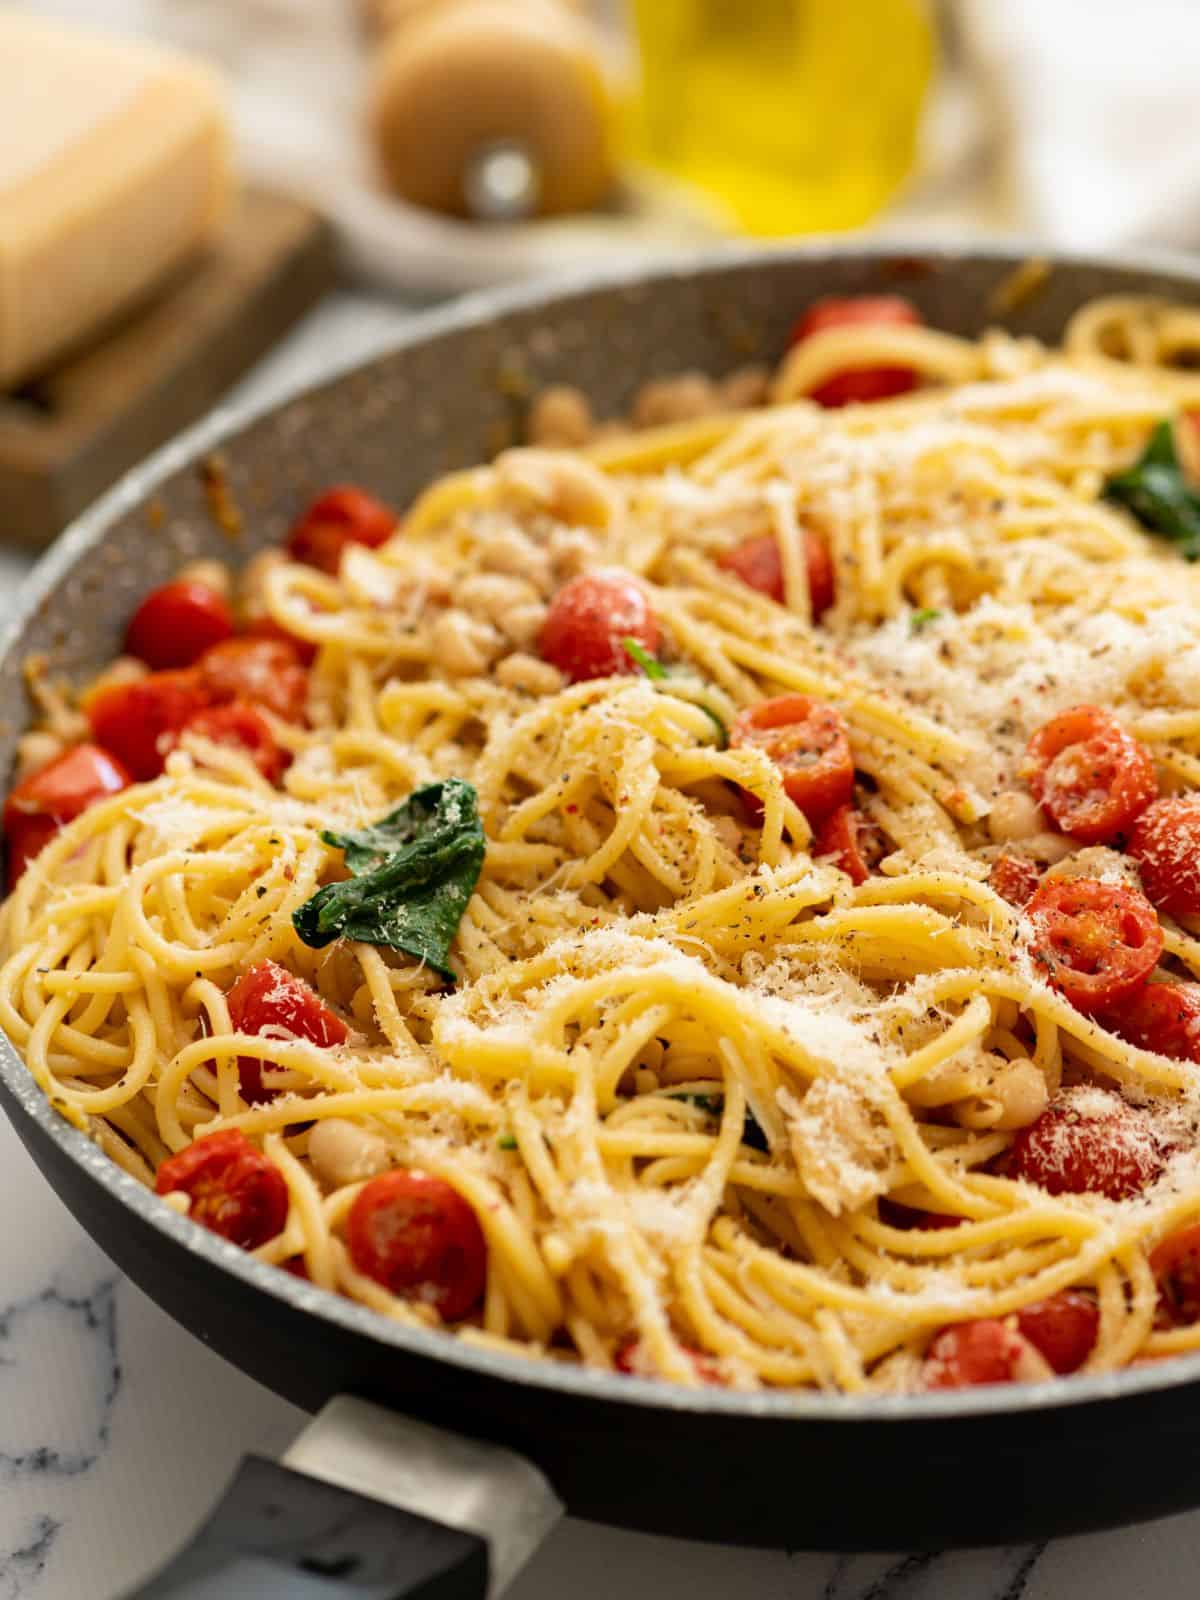 Large skillet with pasta, white beans, tomatoess, and spinach topped with parmesan.